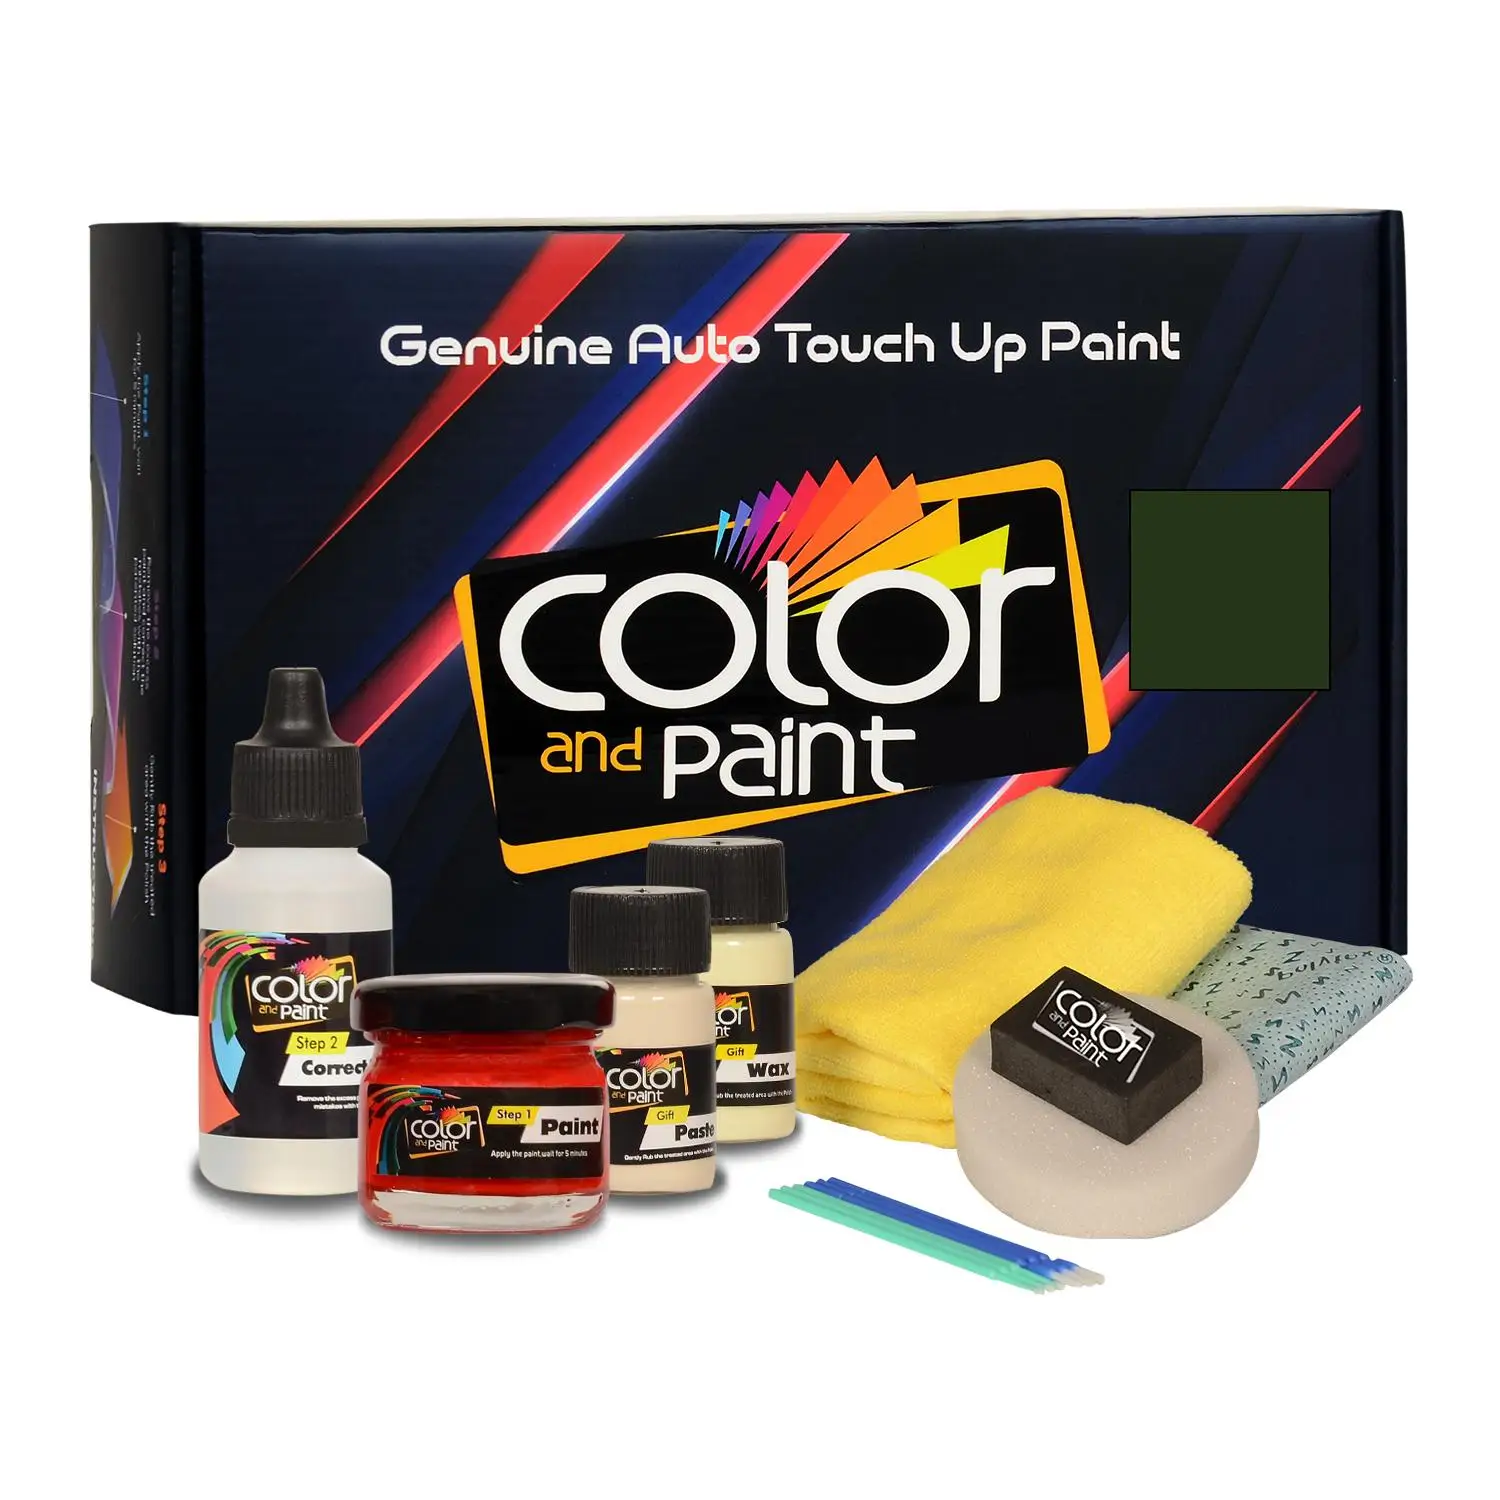 

Color and Paint compatible with Fiat Automotive Touch Up Paint - VERDE RAL 6011 - 778 - Basic Care